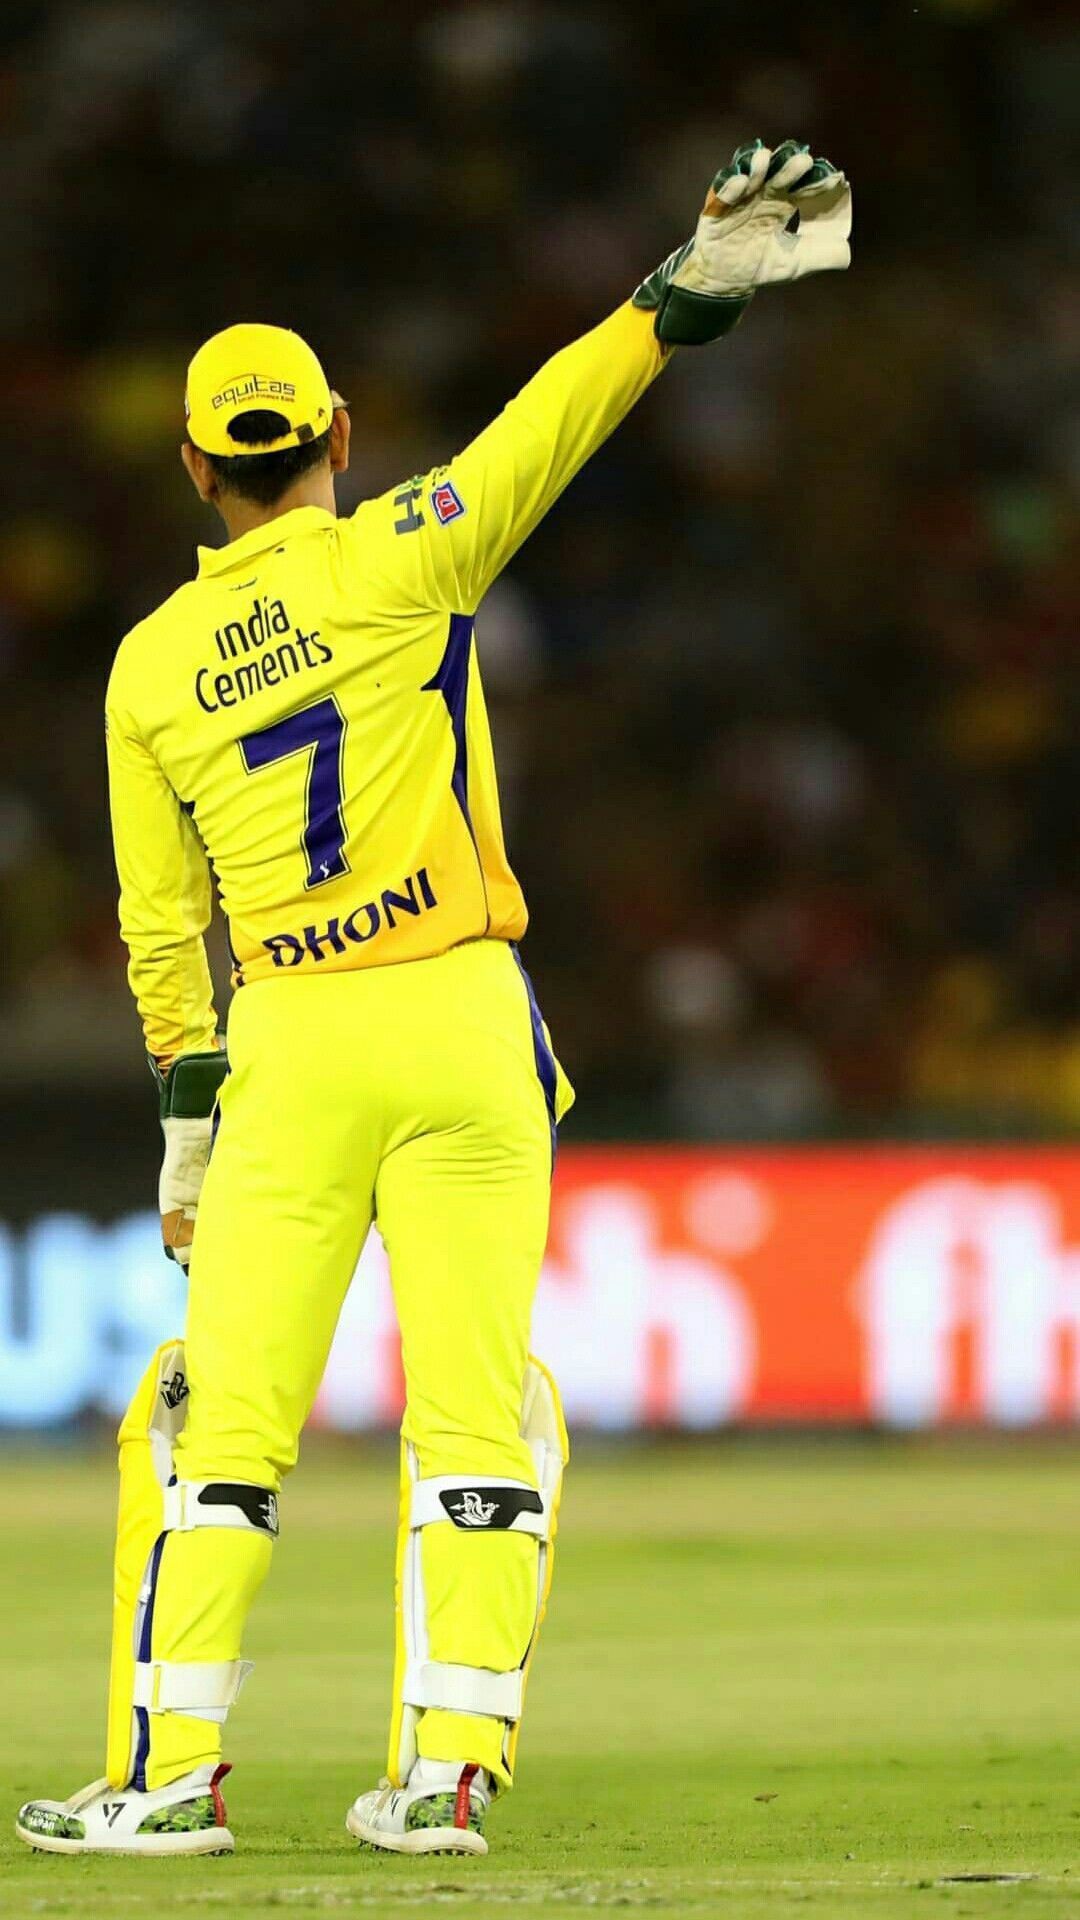 Dhoni 4k Mobile Wallpapers - Wallpaper Cave